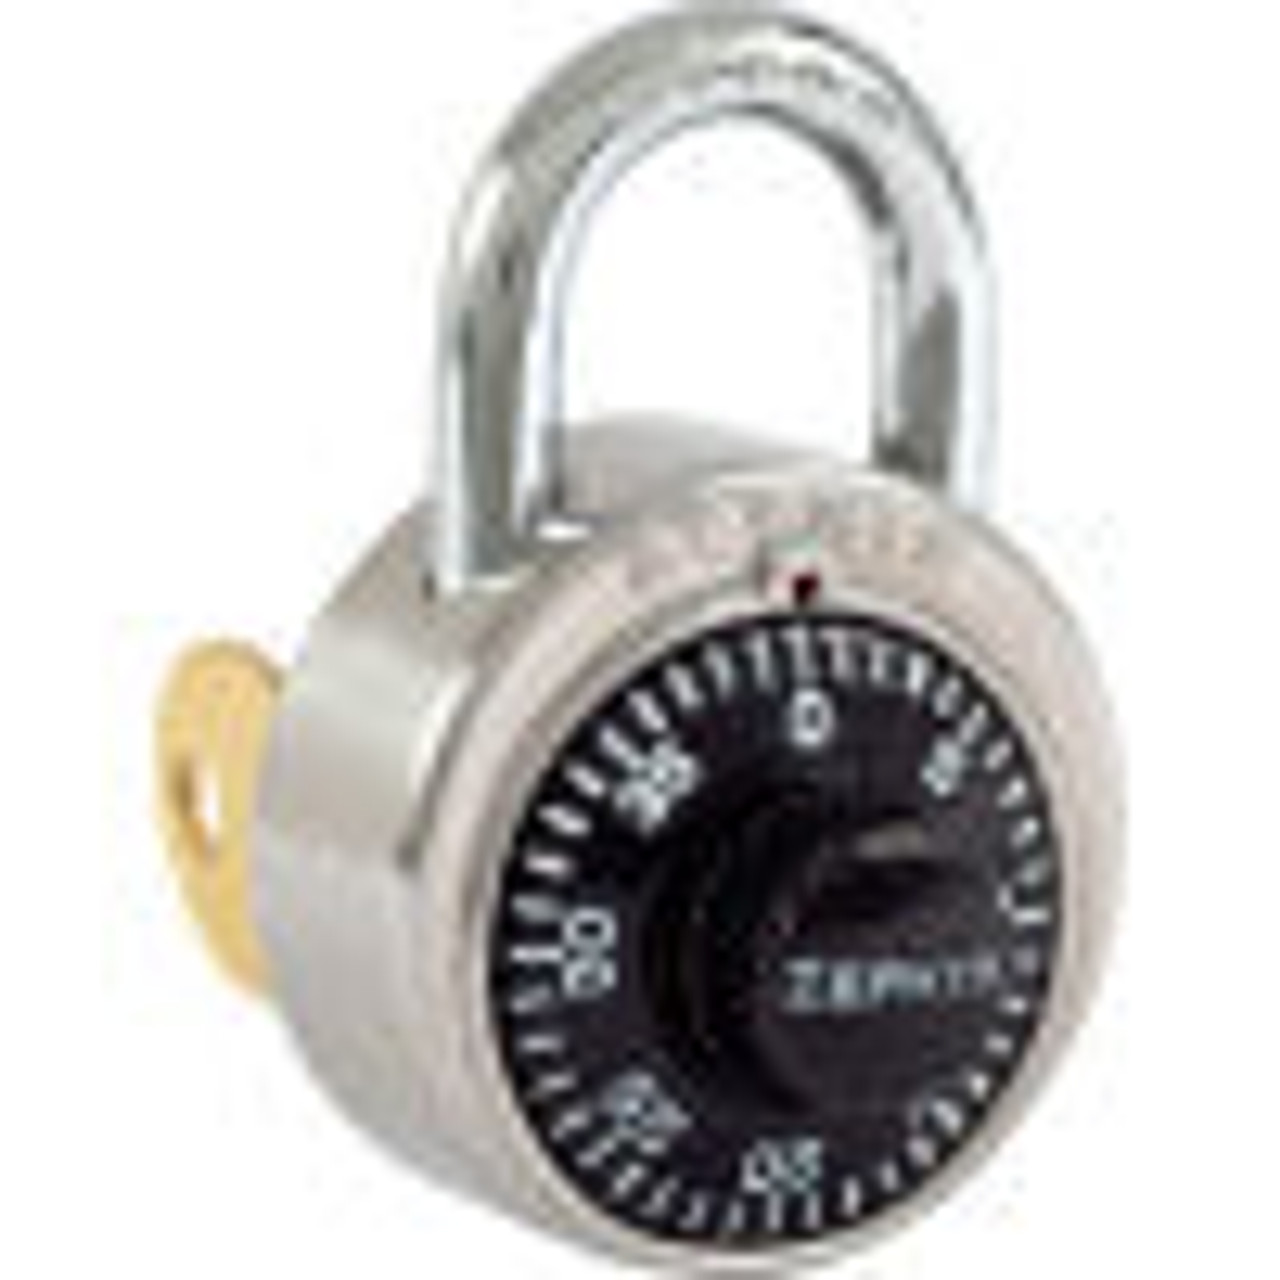 Master Lock 1585 General Security Combination Padlock with Control